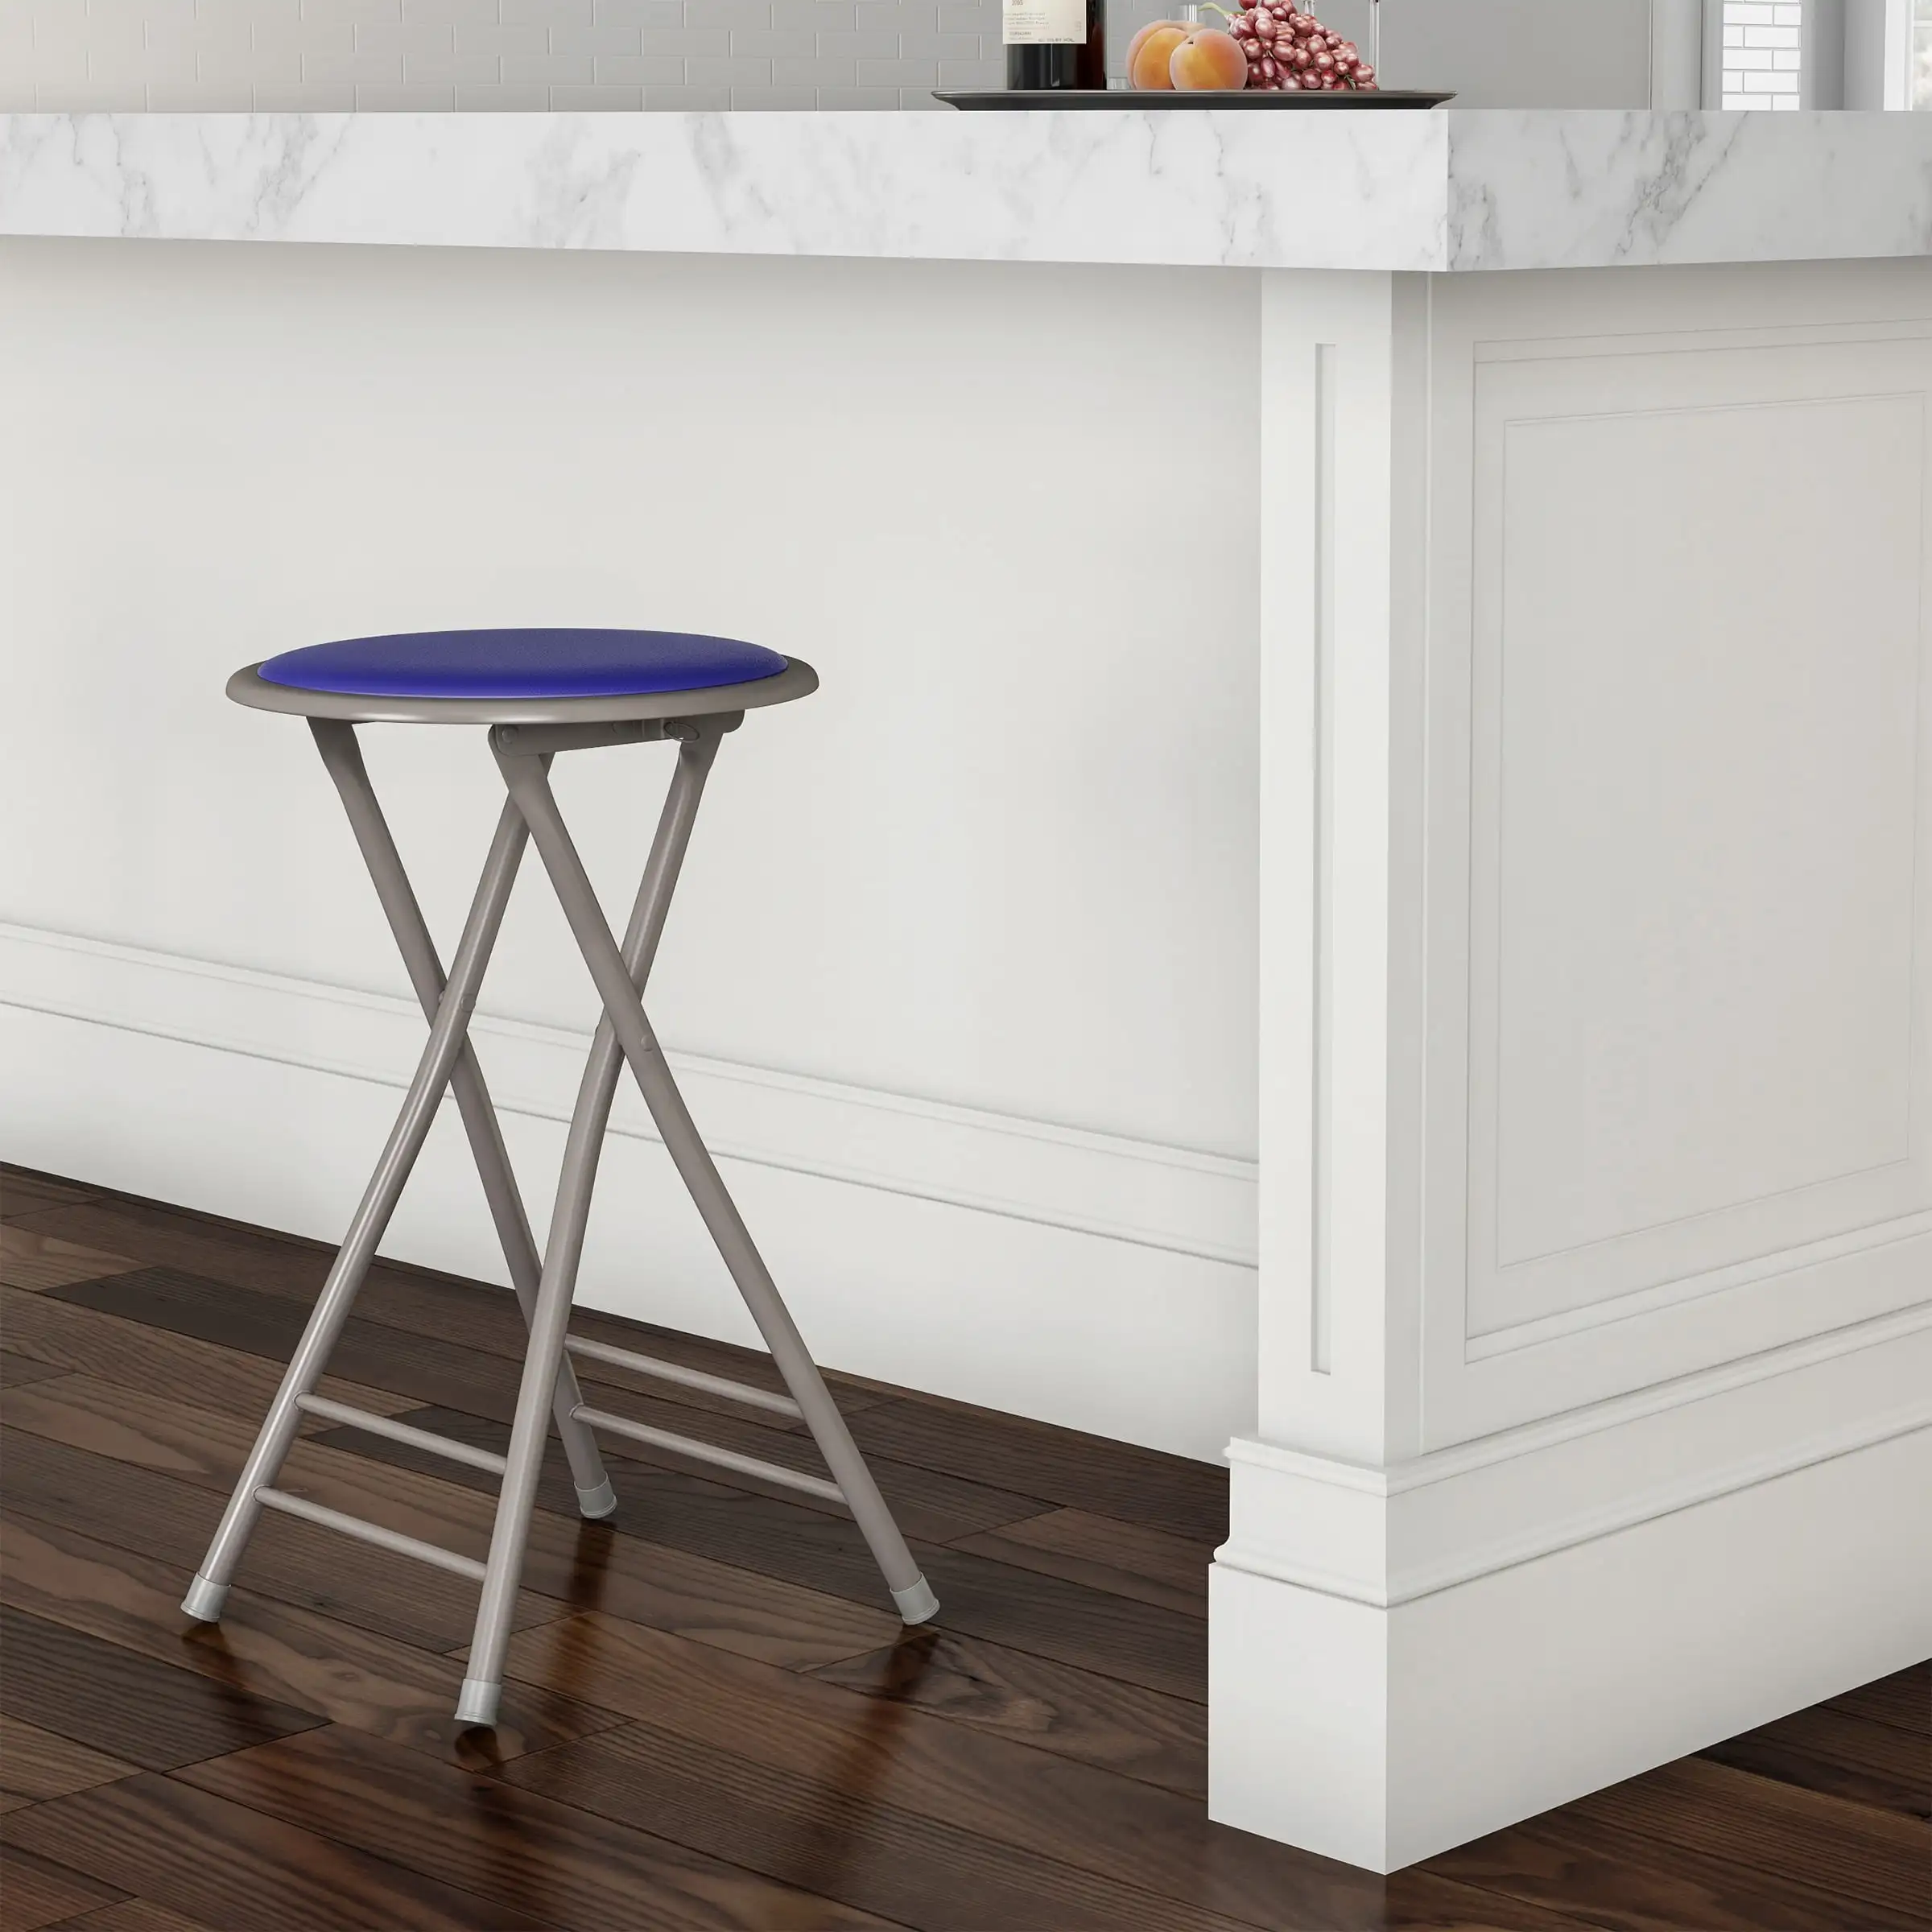 24-counter-height-stool-royal-color-kitchen-heavy-duty-folding-bar-chairs